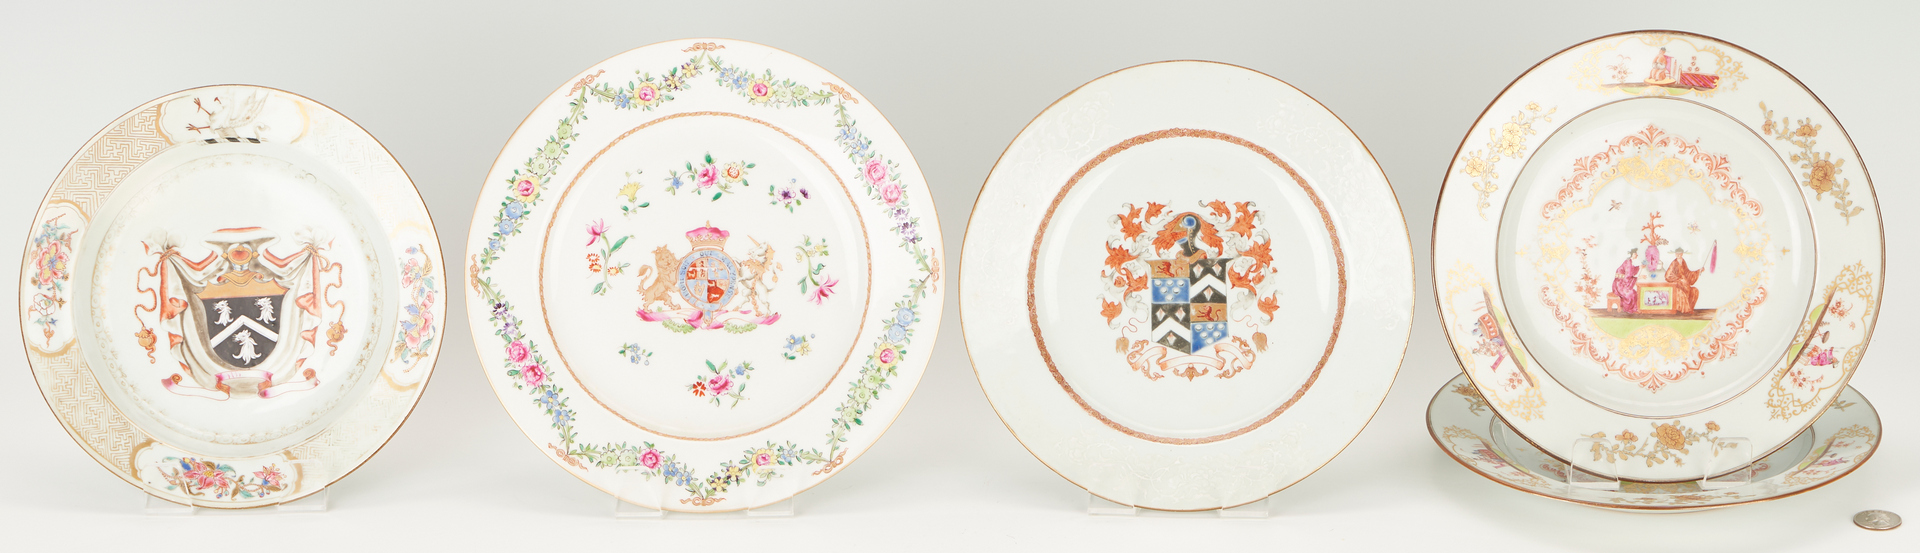 Lot 24: 4 Chinese Export Porcelain Armorial Plates & 1 Shallow Bowl, Total 5